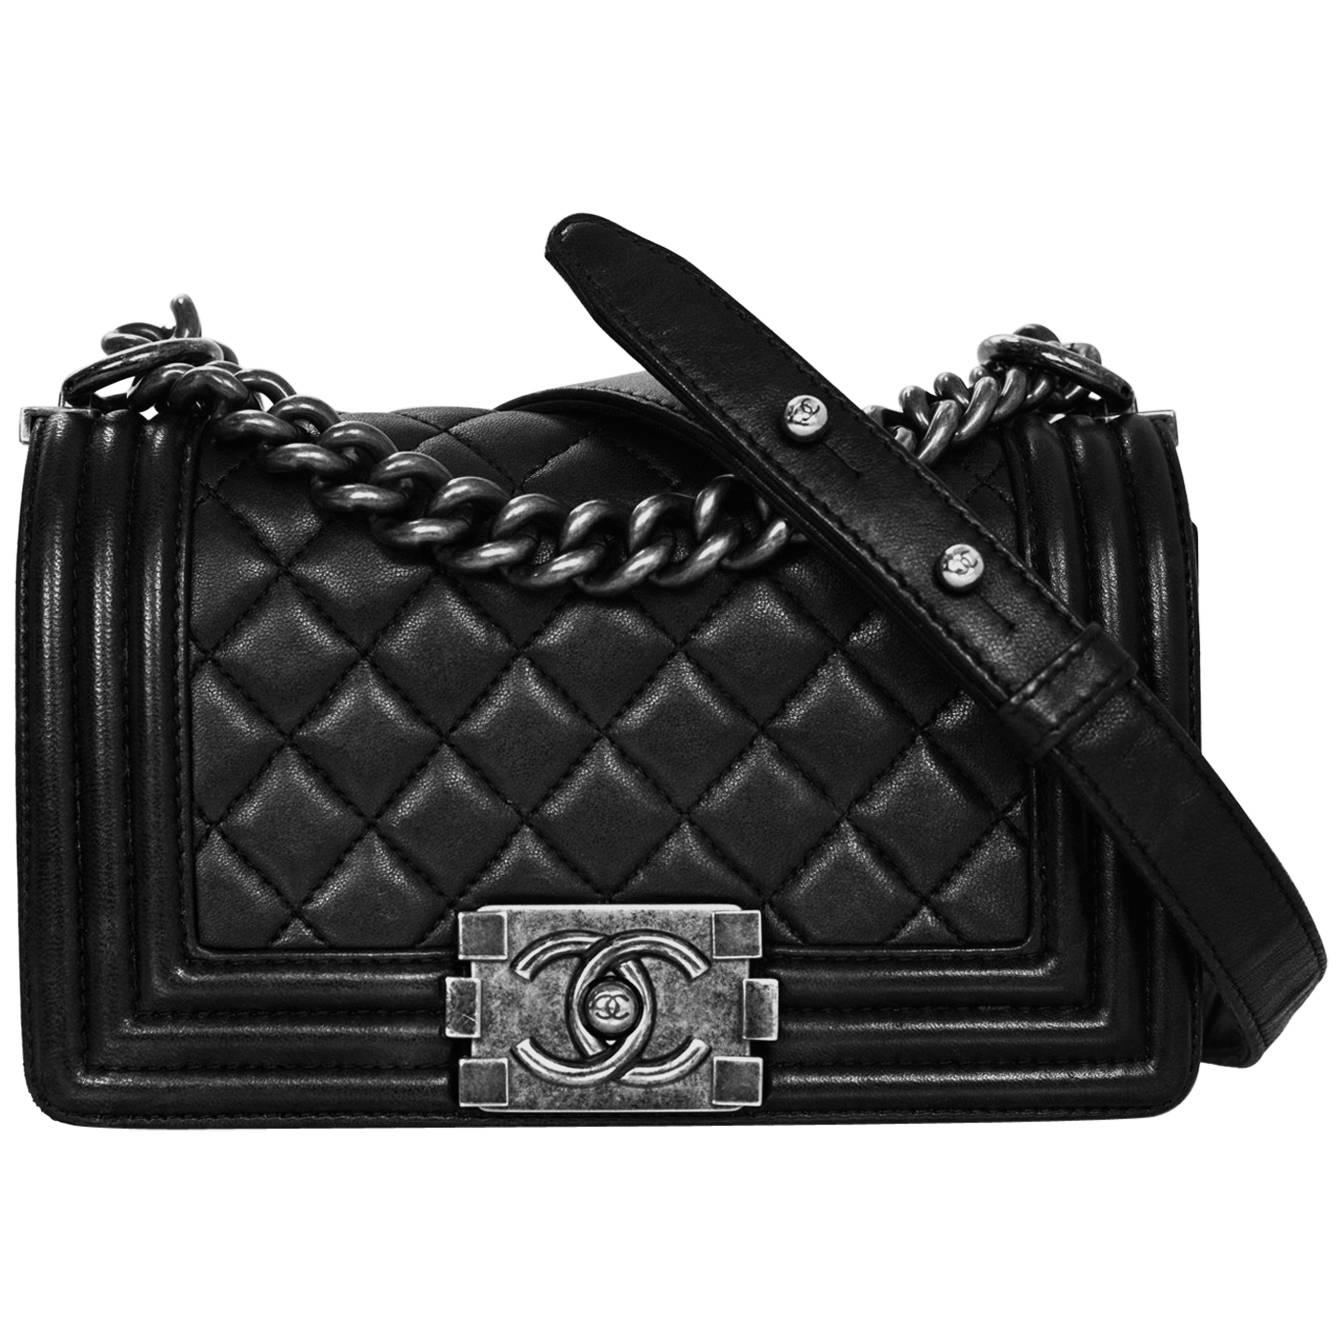 Chanel Black Quilted Lambskin Small Boy Bag with Dust Bag